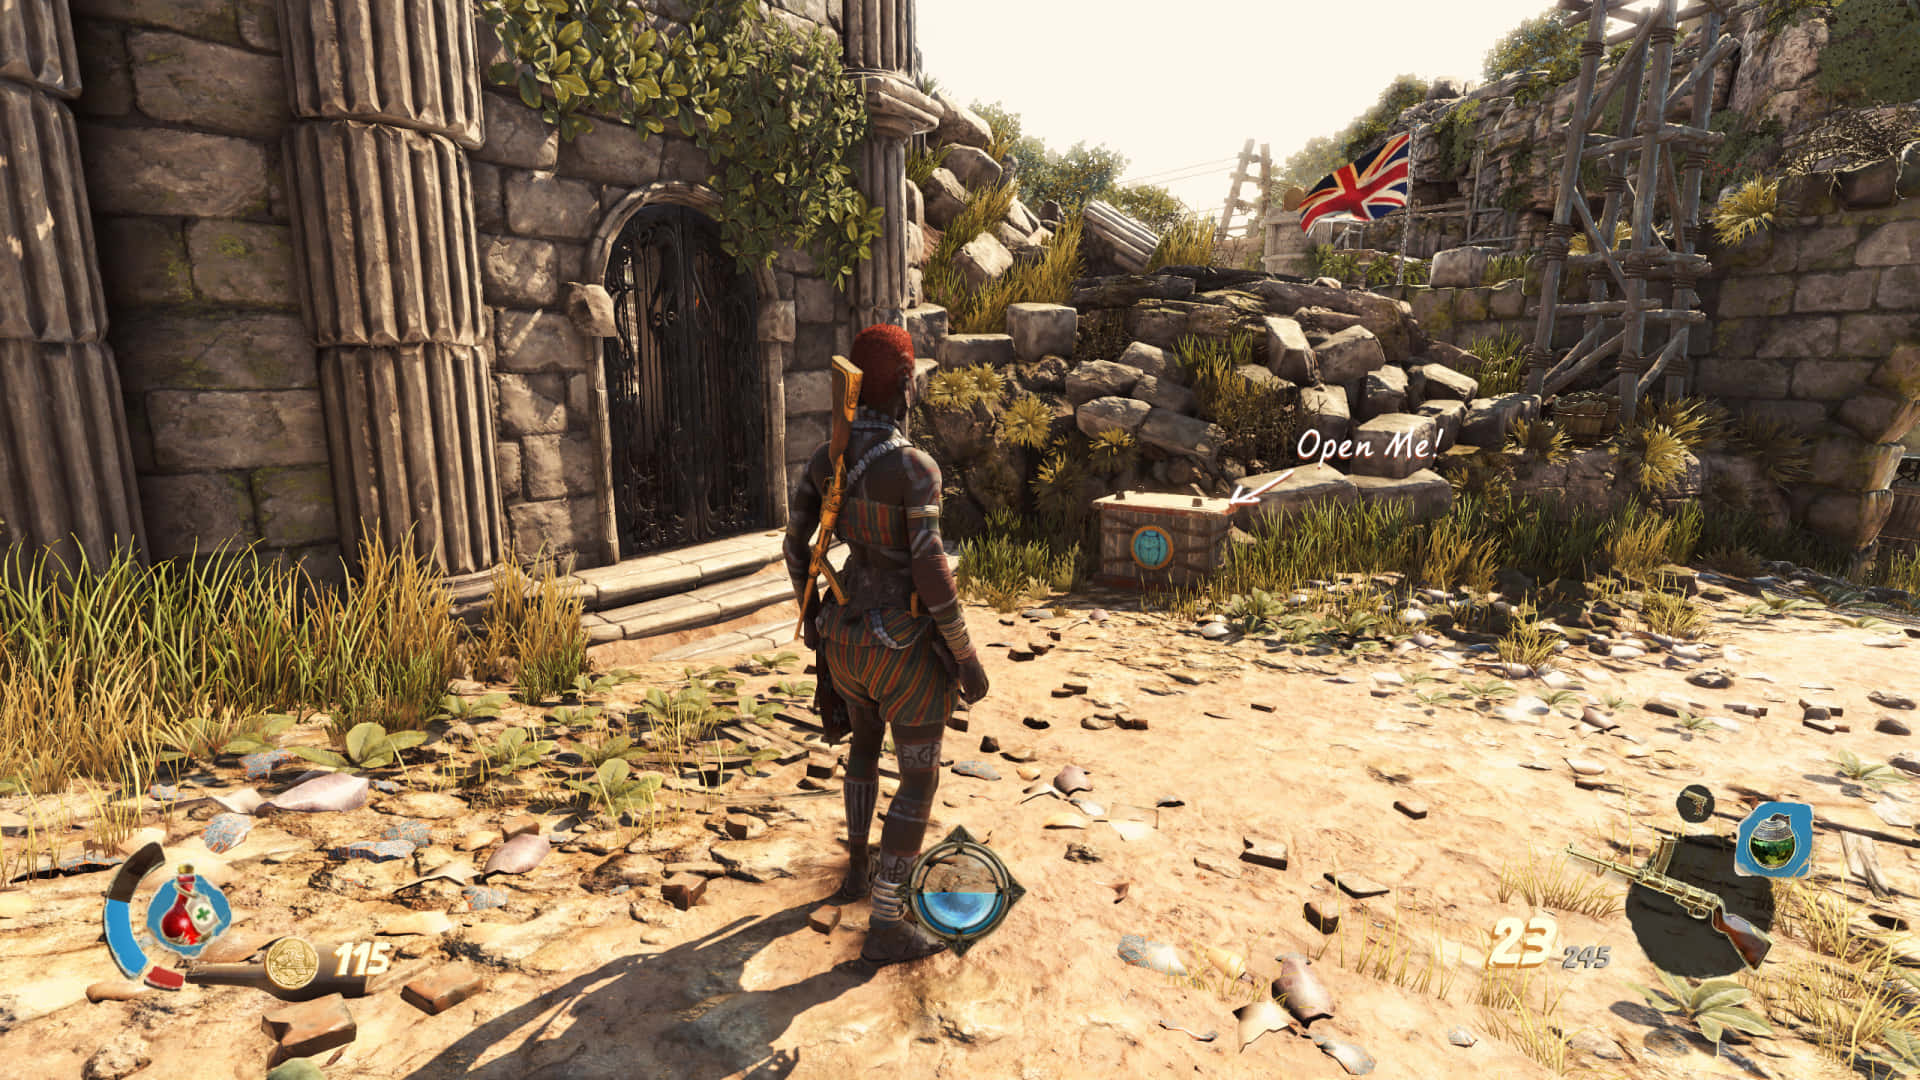 A Screenshot Of A Character Standing In A Dirt Area